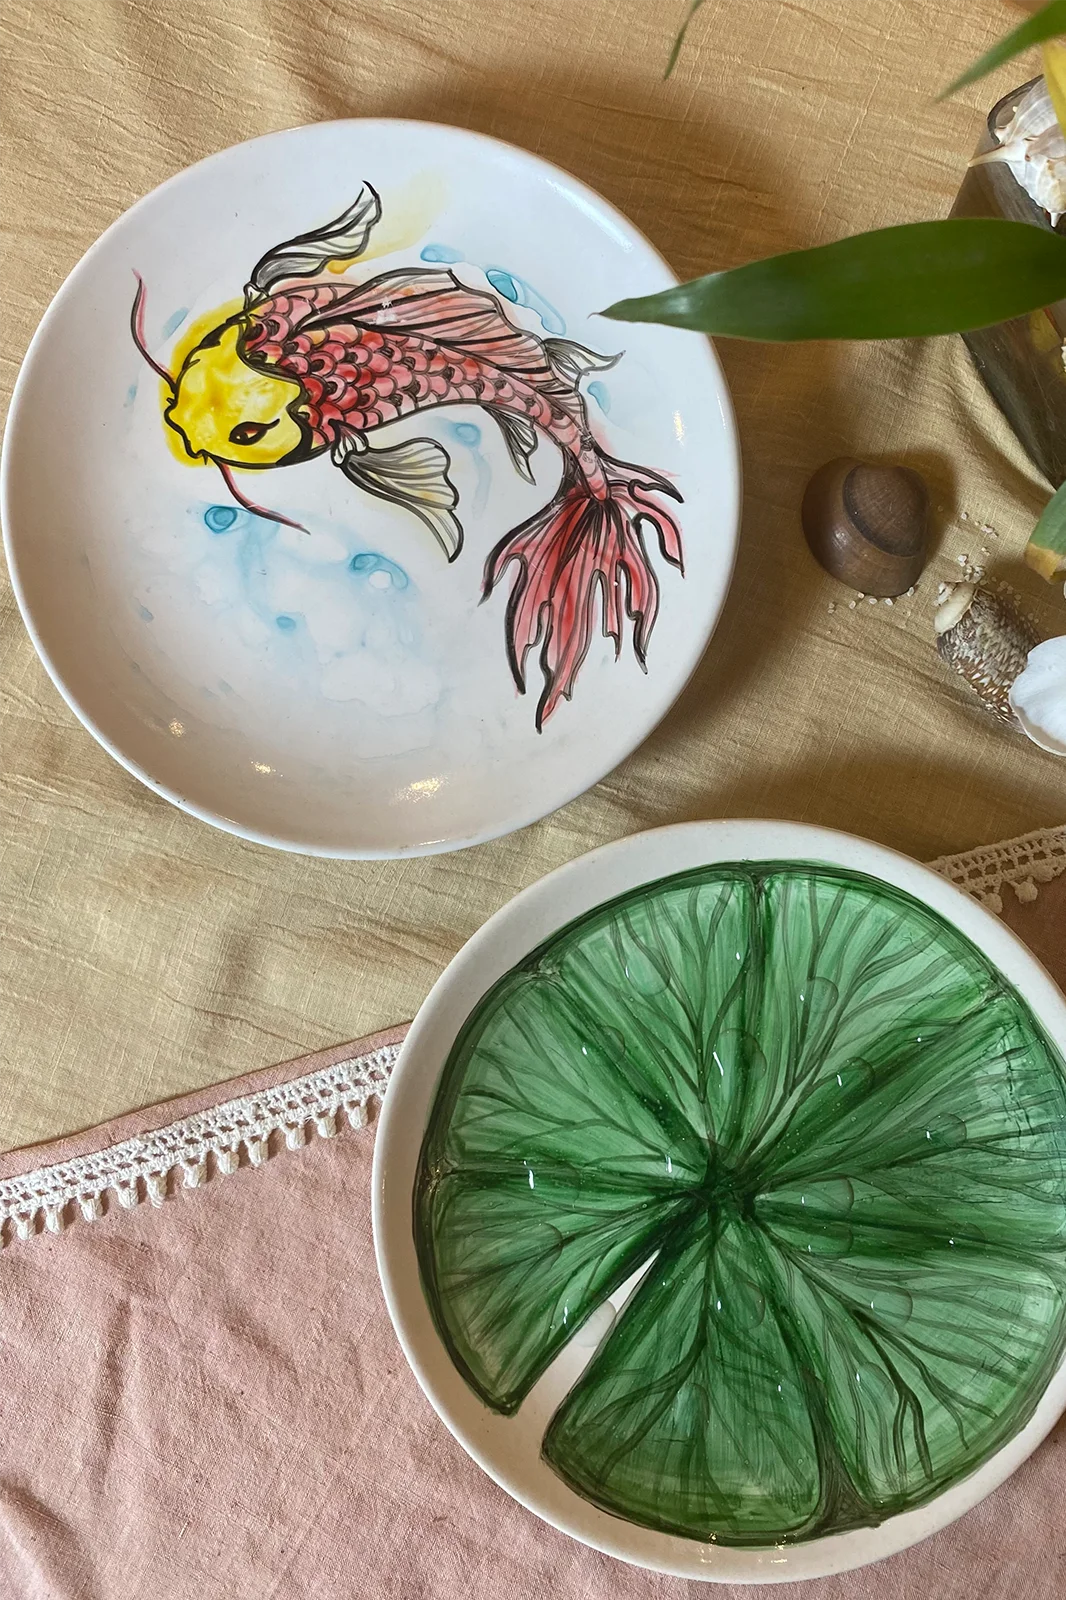 Koi fish ceramic plate set of 2, hand painted plate, ceramic plates, handmade ceramic plates, handpainted ceramic plates, ceramic plates set, painted plate, painted plate set, dinner ceramic plates, ceramic plates online, ceramic plates online India, decorative ceramic plates, jack of all, Sepia stories